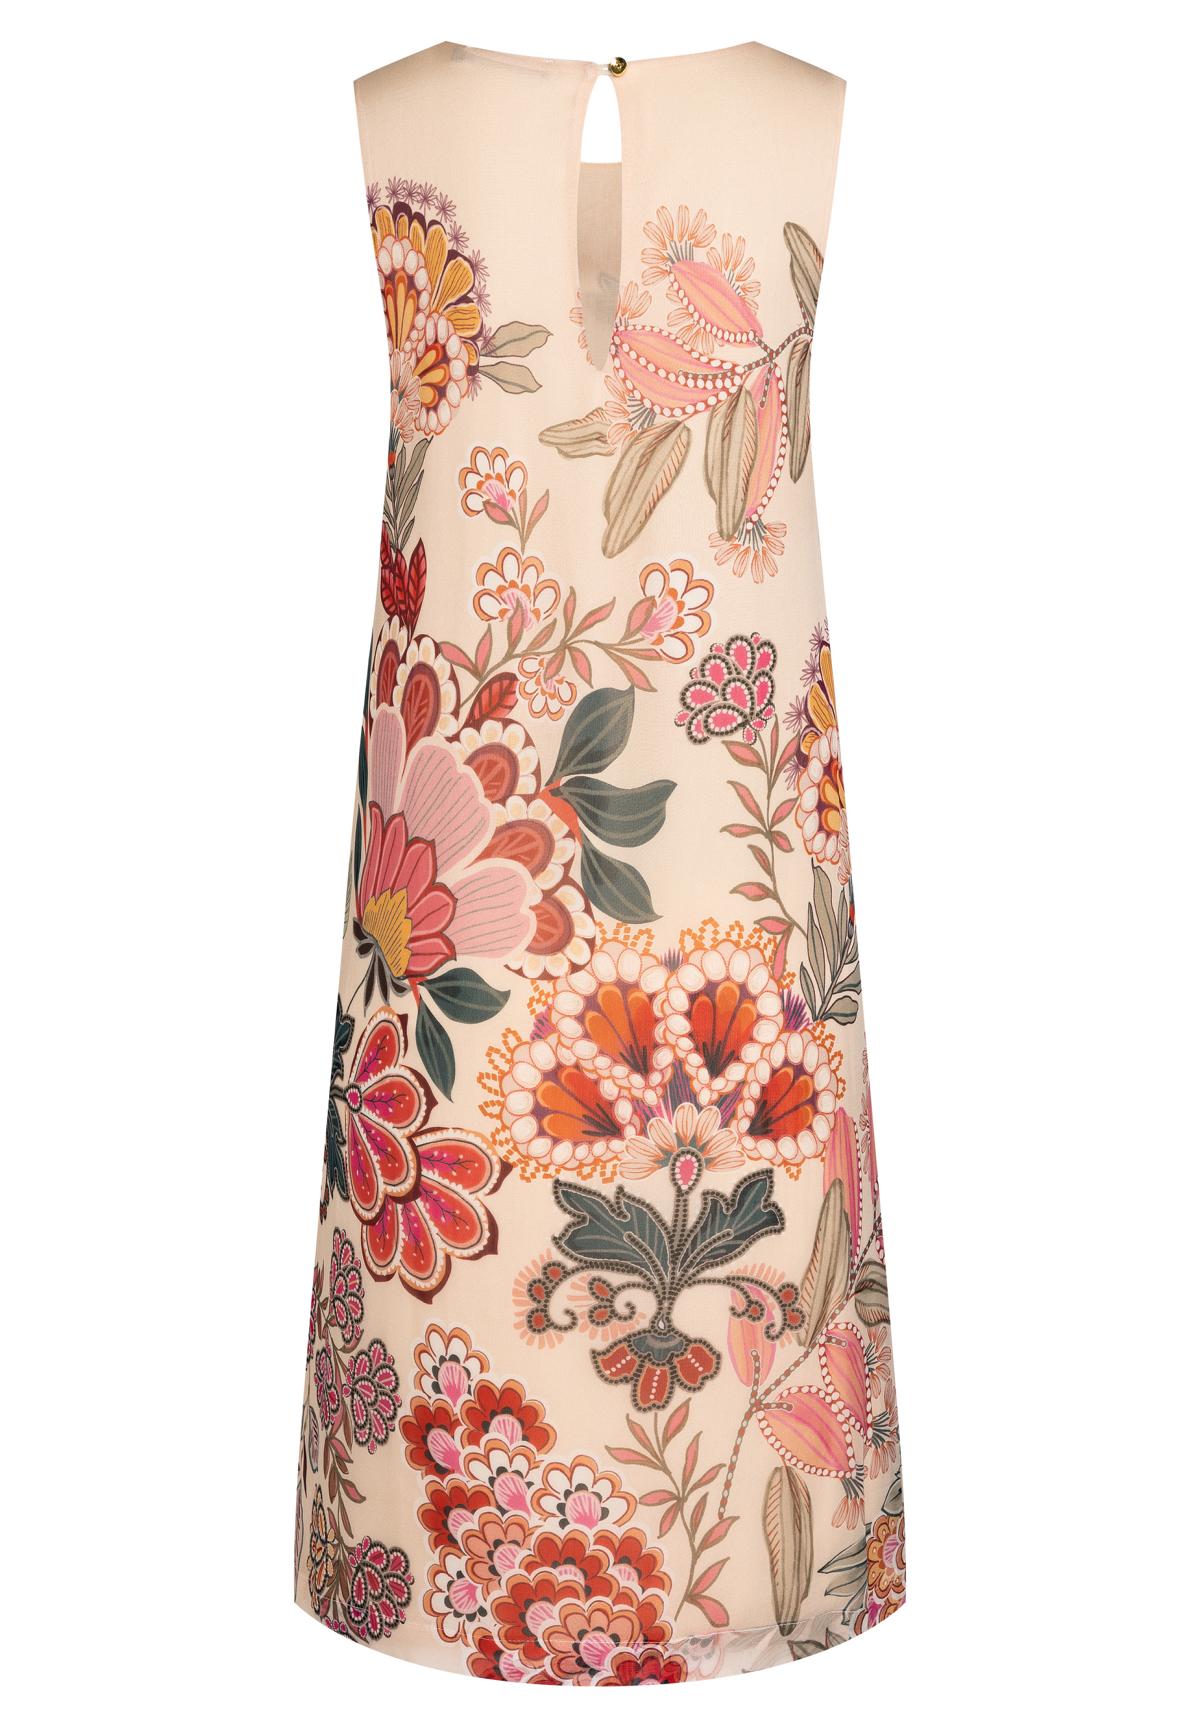 Simple sleeveless dress Cavos with flower-pattern in beige, red & green ...